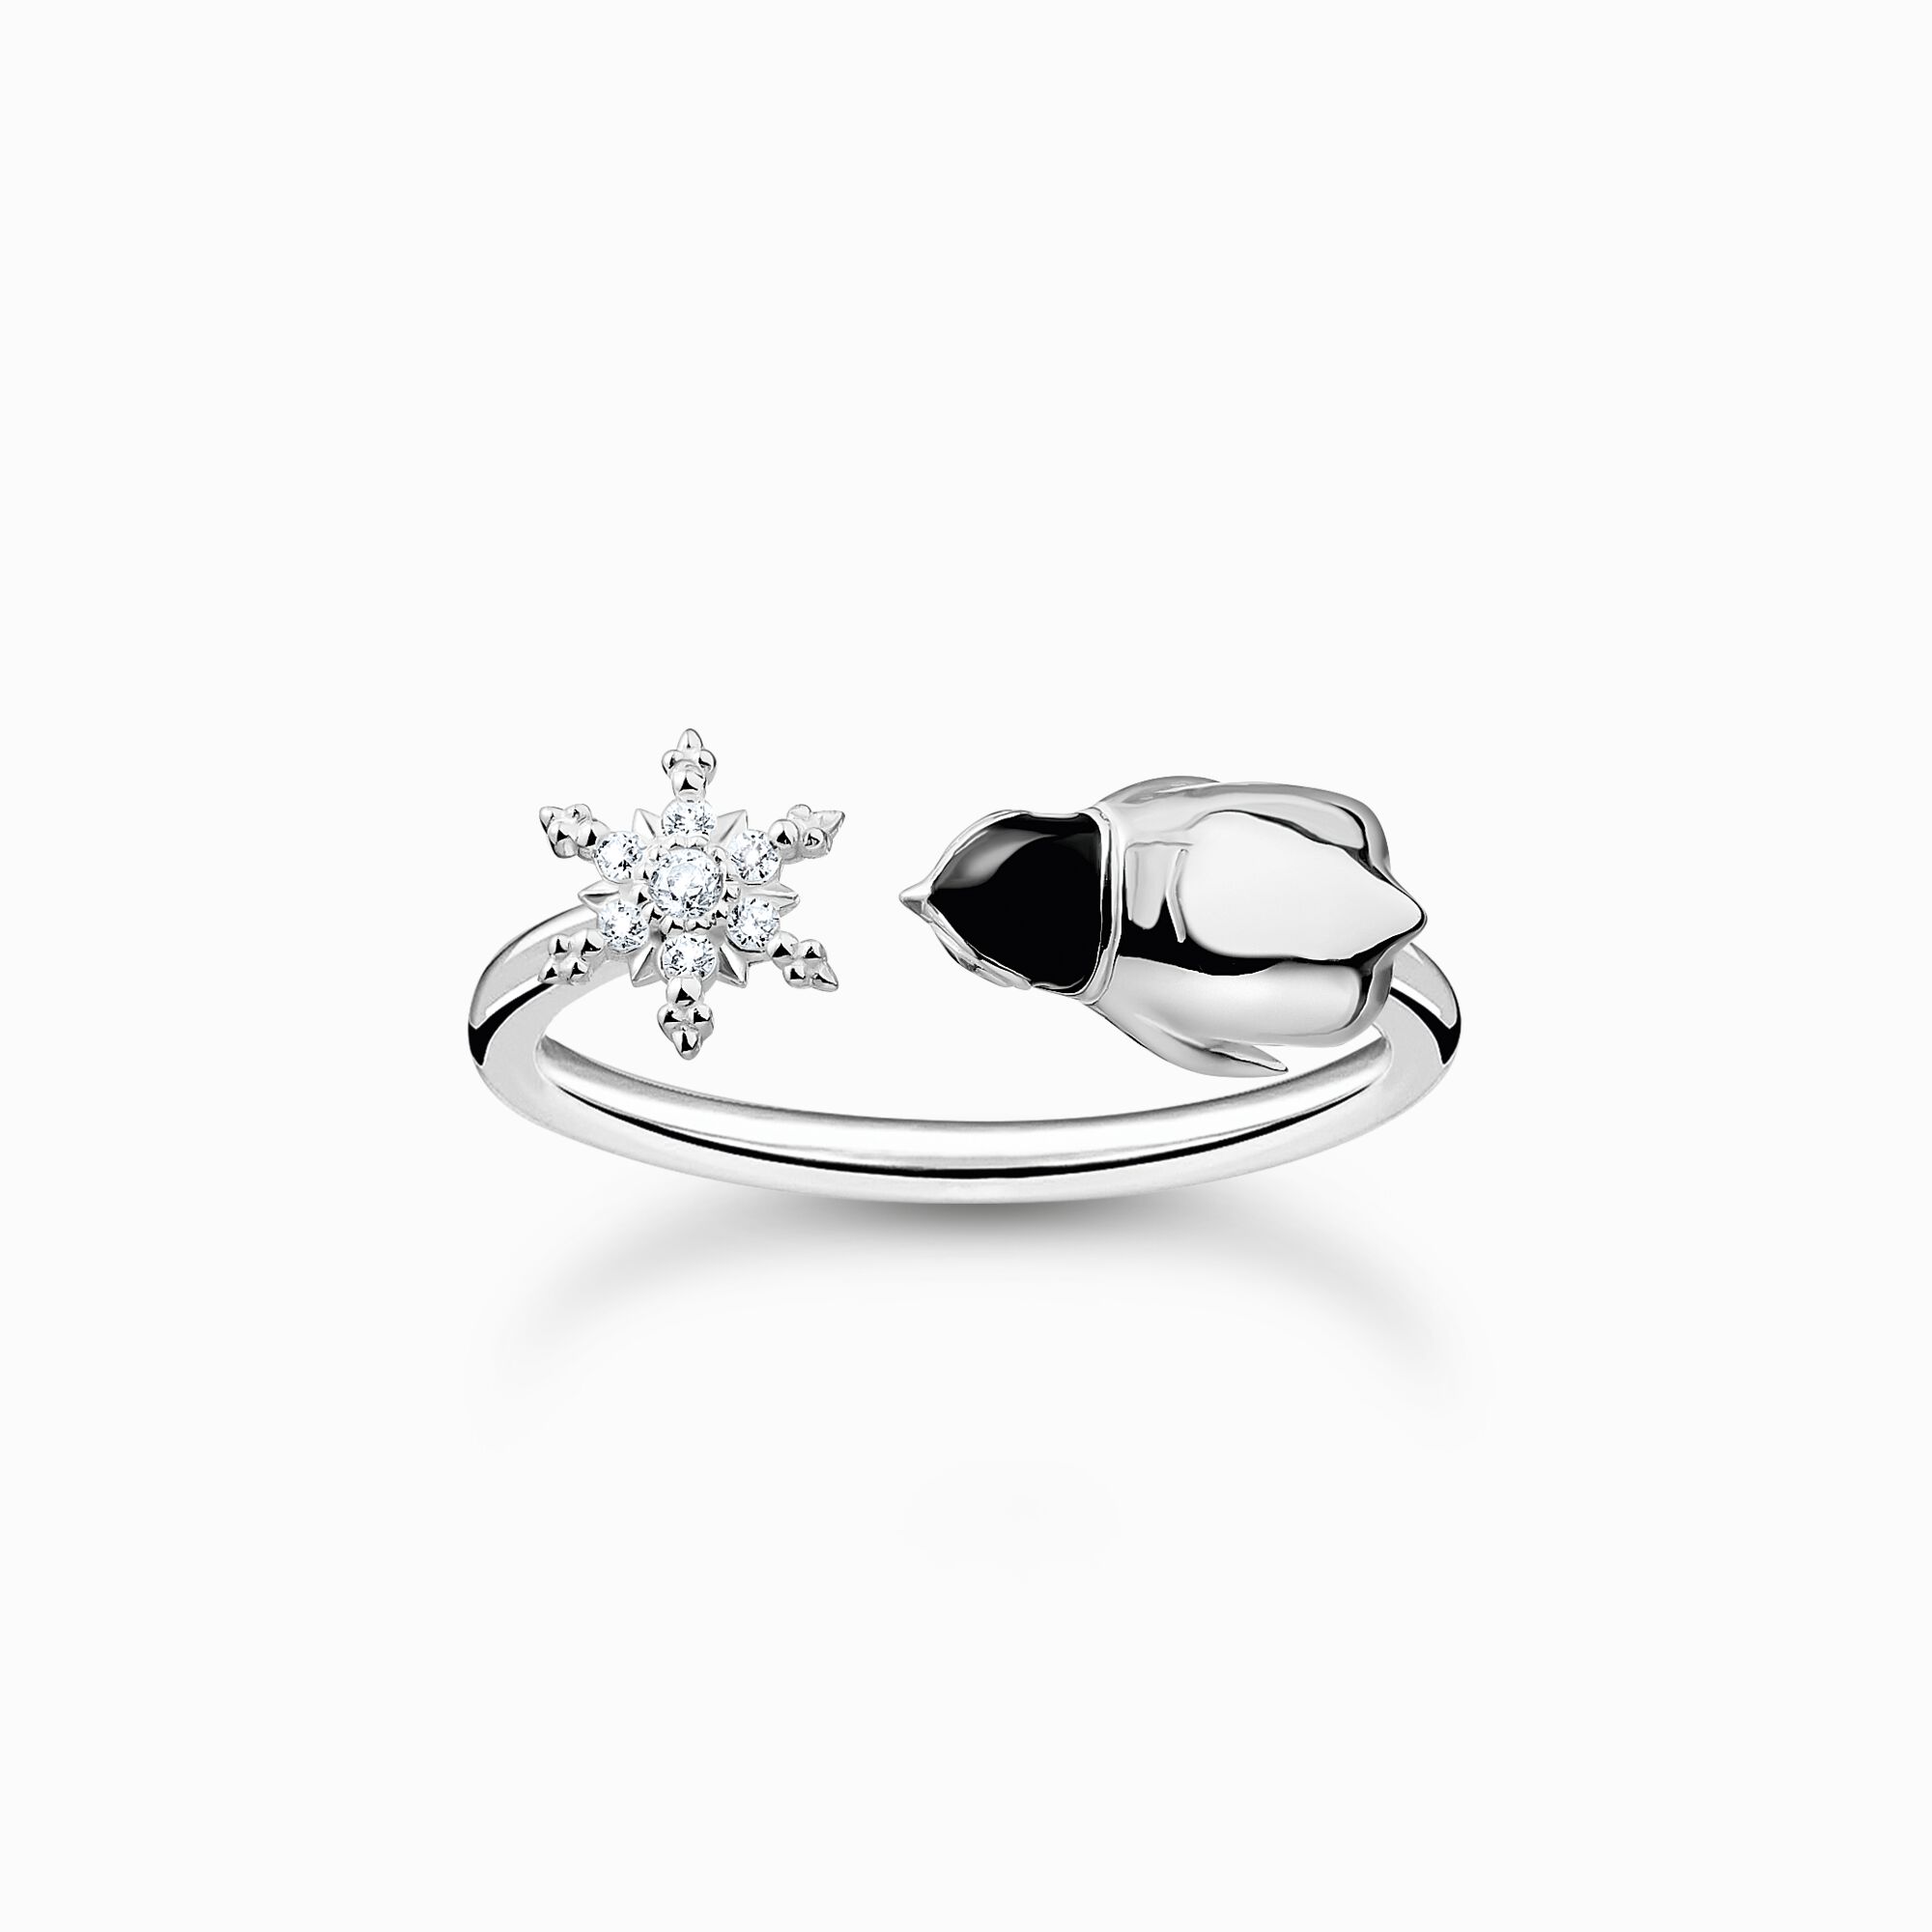 Ring snowflakes and penguin silver from the Charming Collection collection in the THOMAS SABO online store